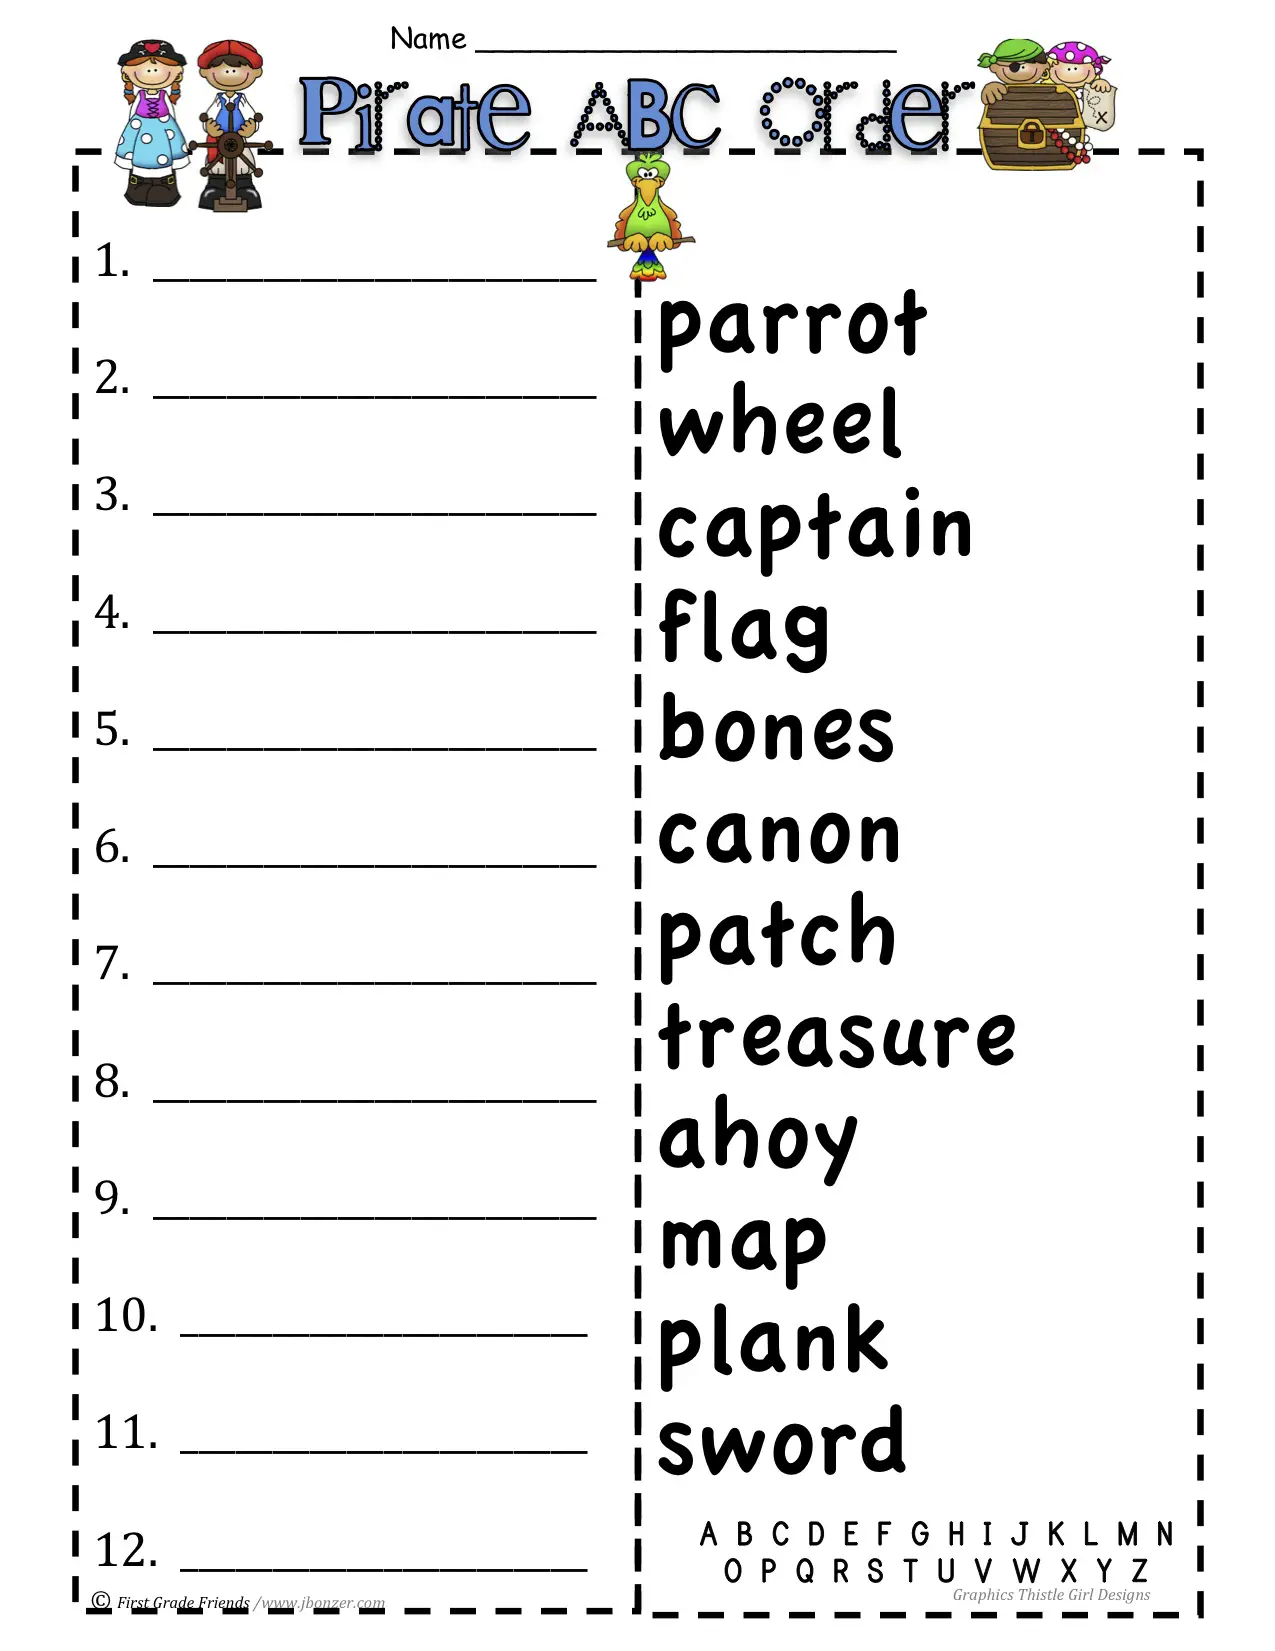 Free Printable Abc Order For Second Graders 10 Best Images Of 